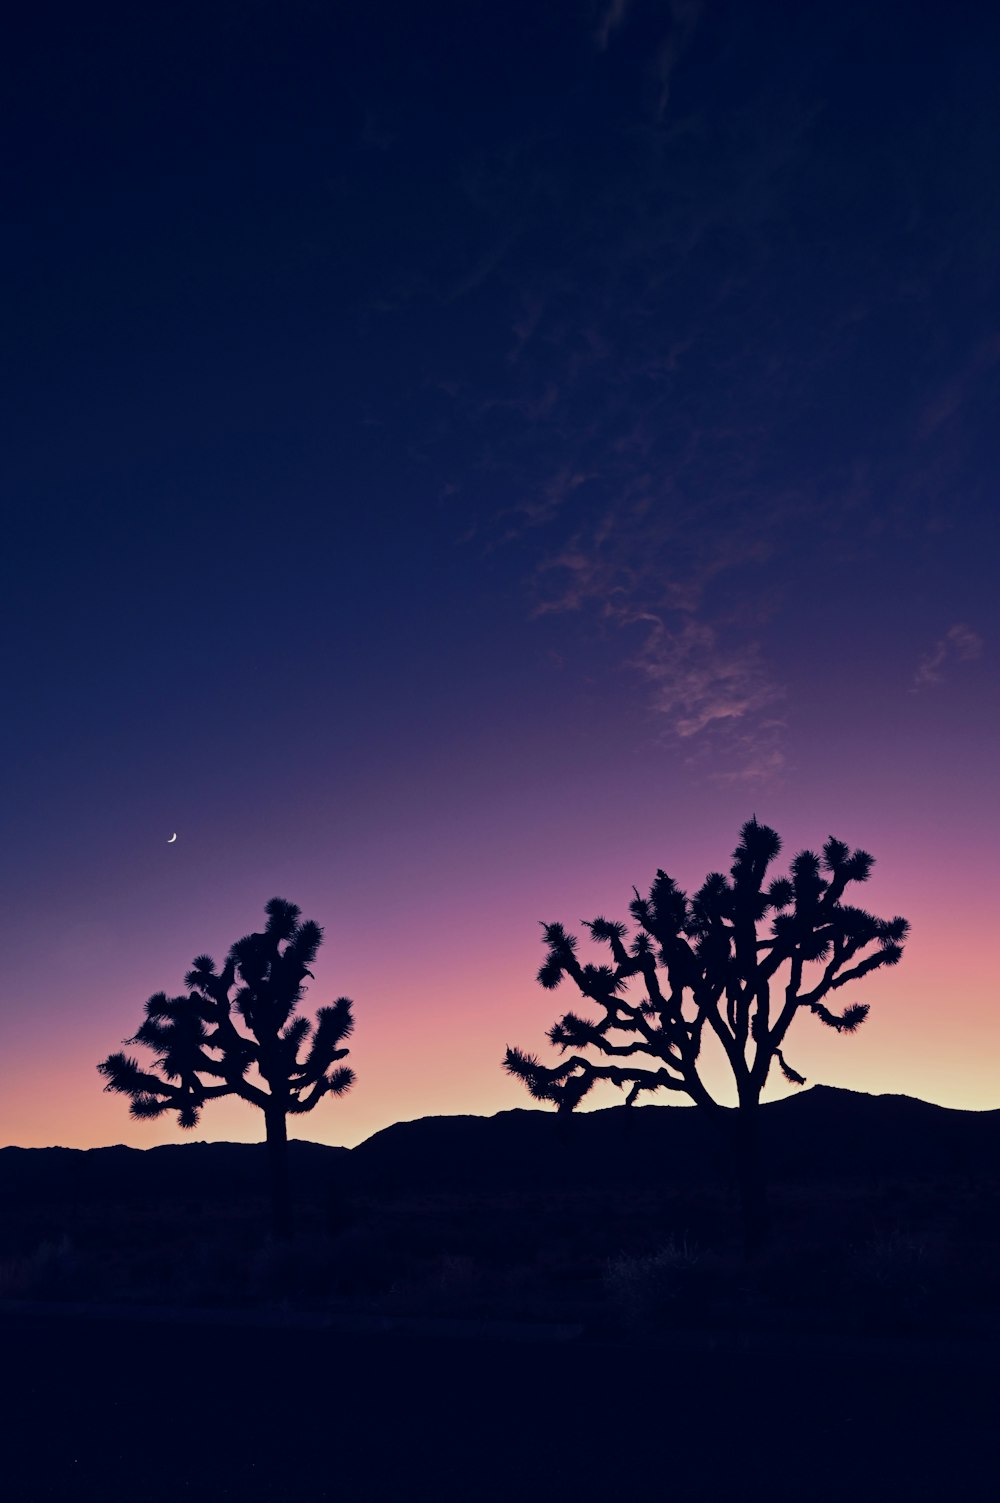 silhouettes of trees against a colorful sky